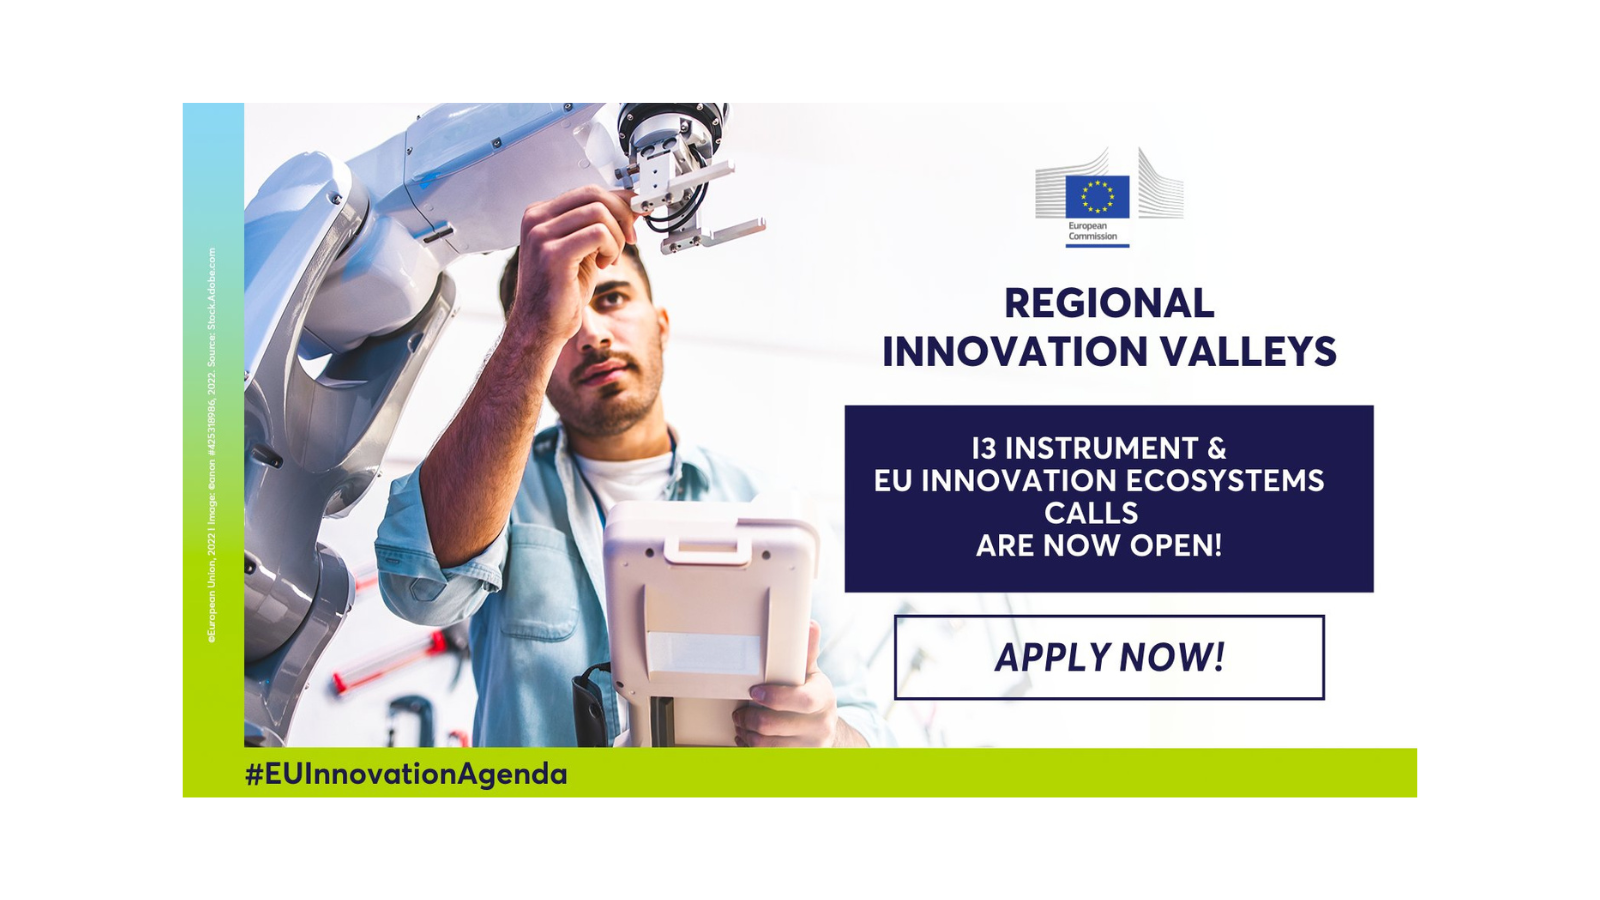 Regional Innovation Valleys calls for proposals launched!